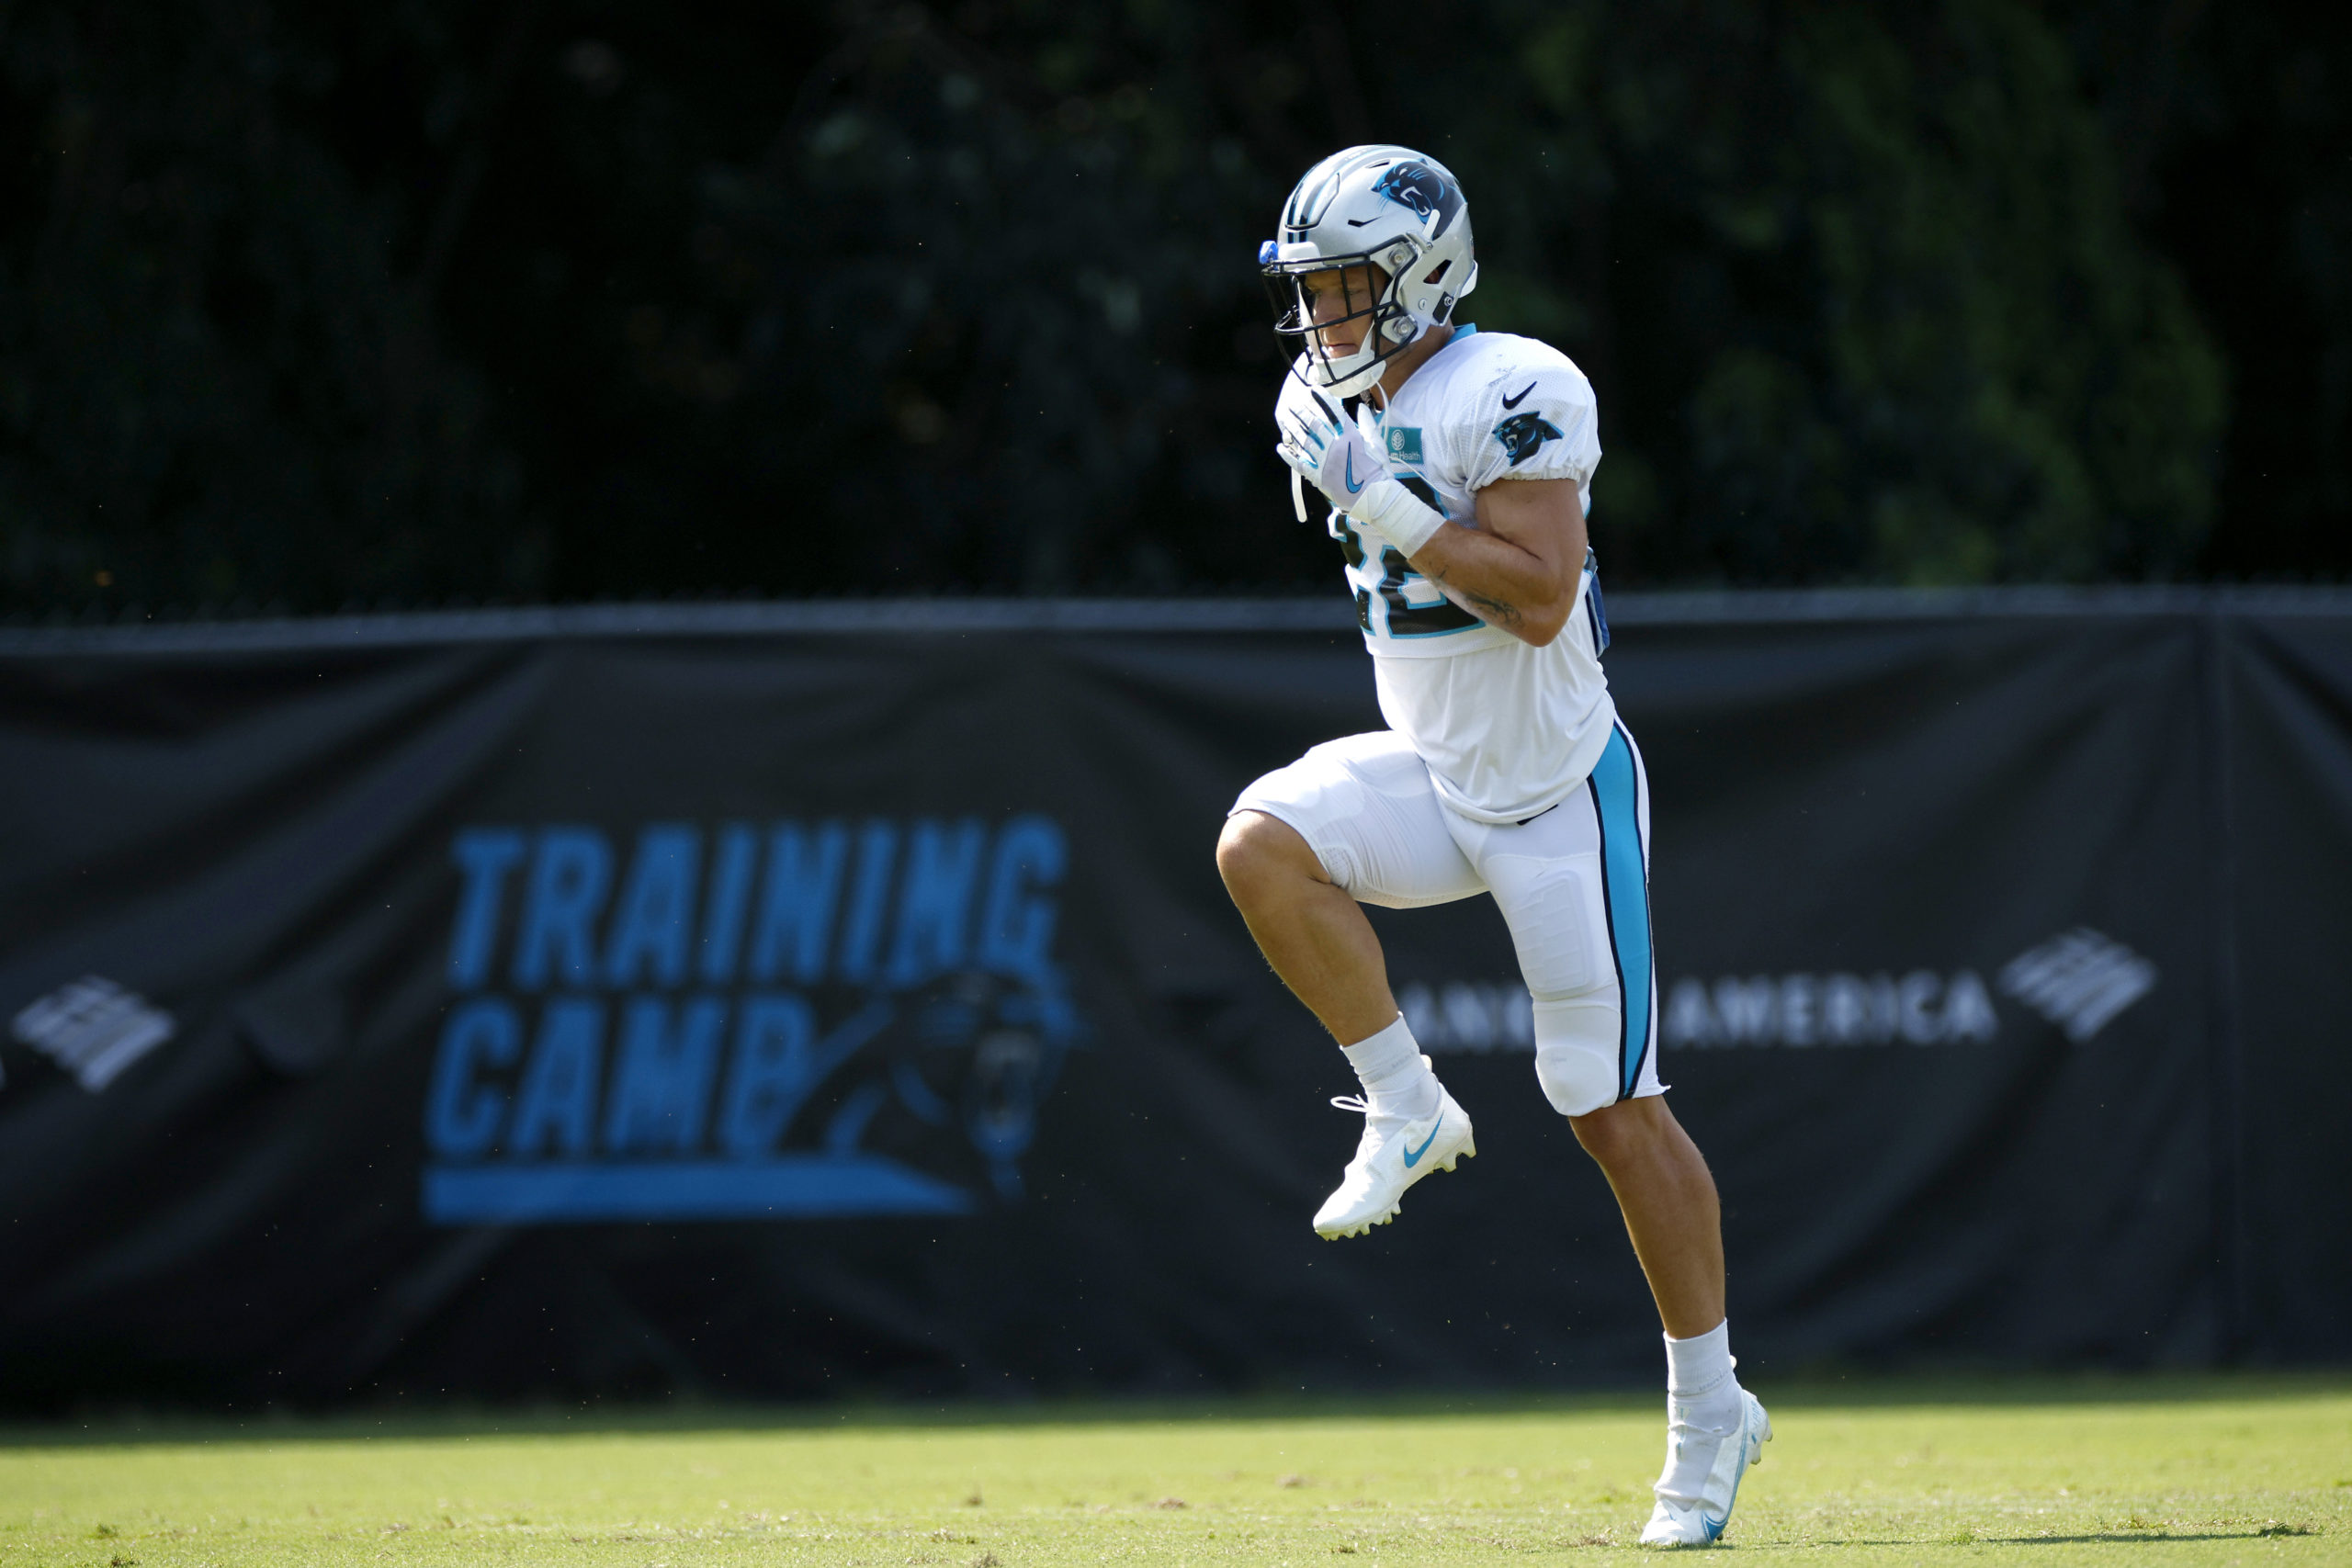 Christian McCaffrey at training camp. Vinnie Iyer of Sporting News says fantasy football owners sho...